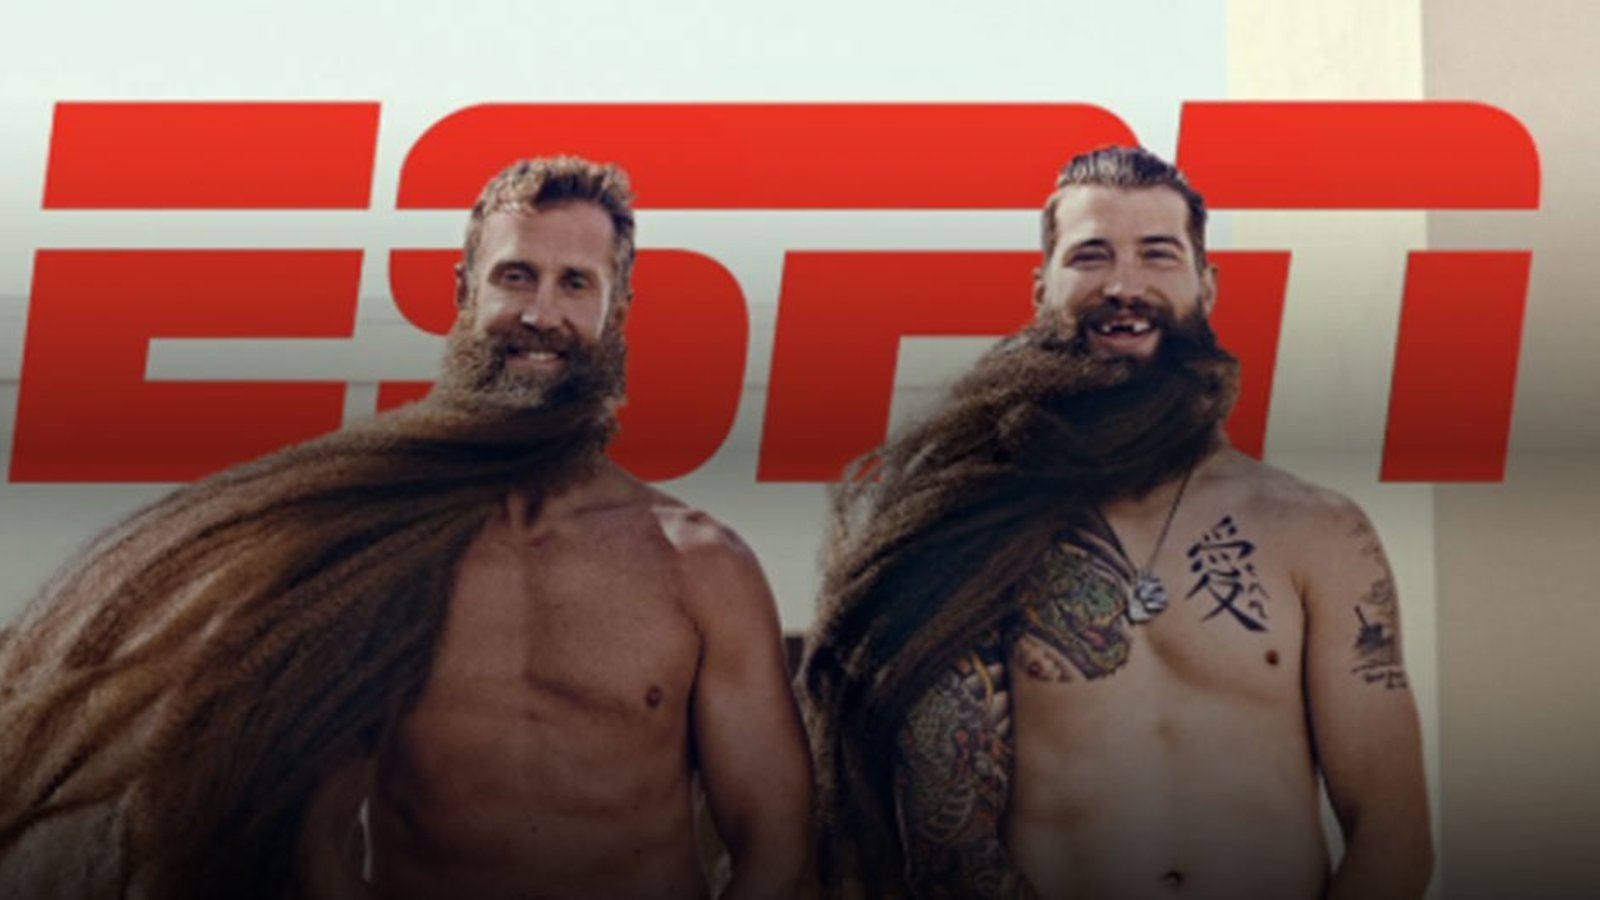 Gotta See It: The revealing cover for Thornton’s and Burns’ ESPN Body Issue